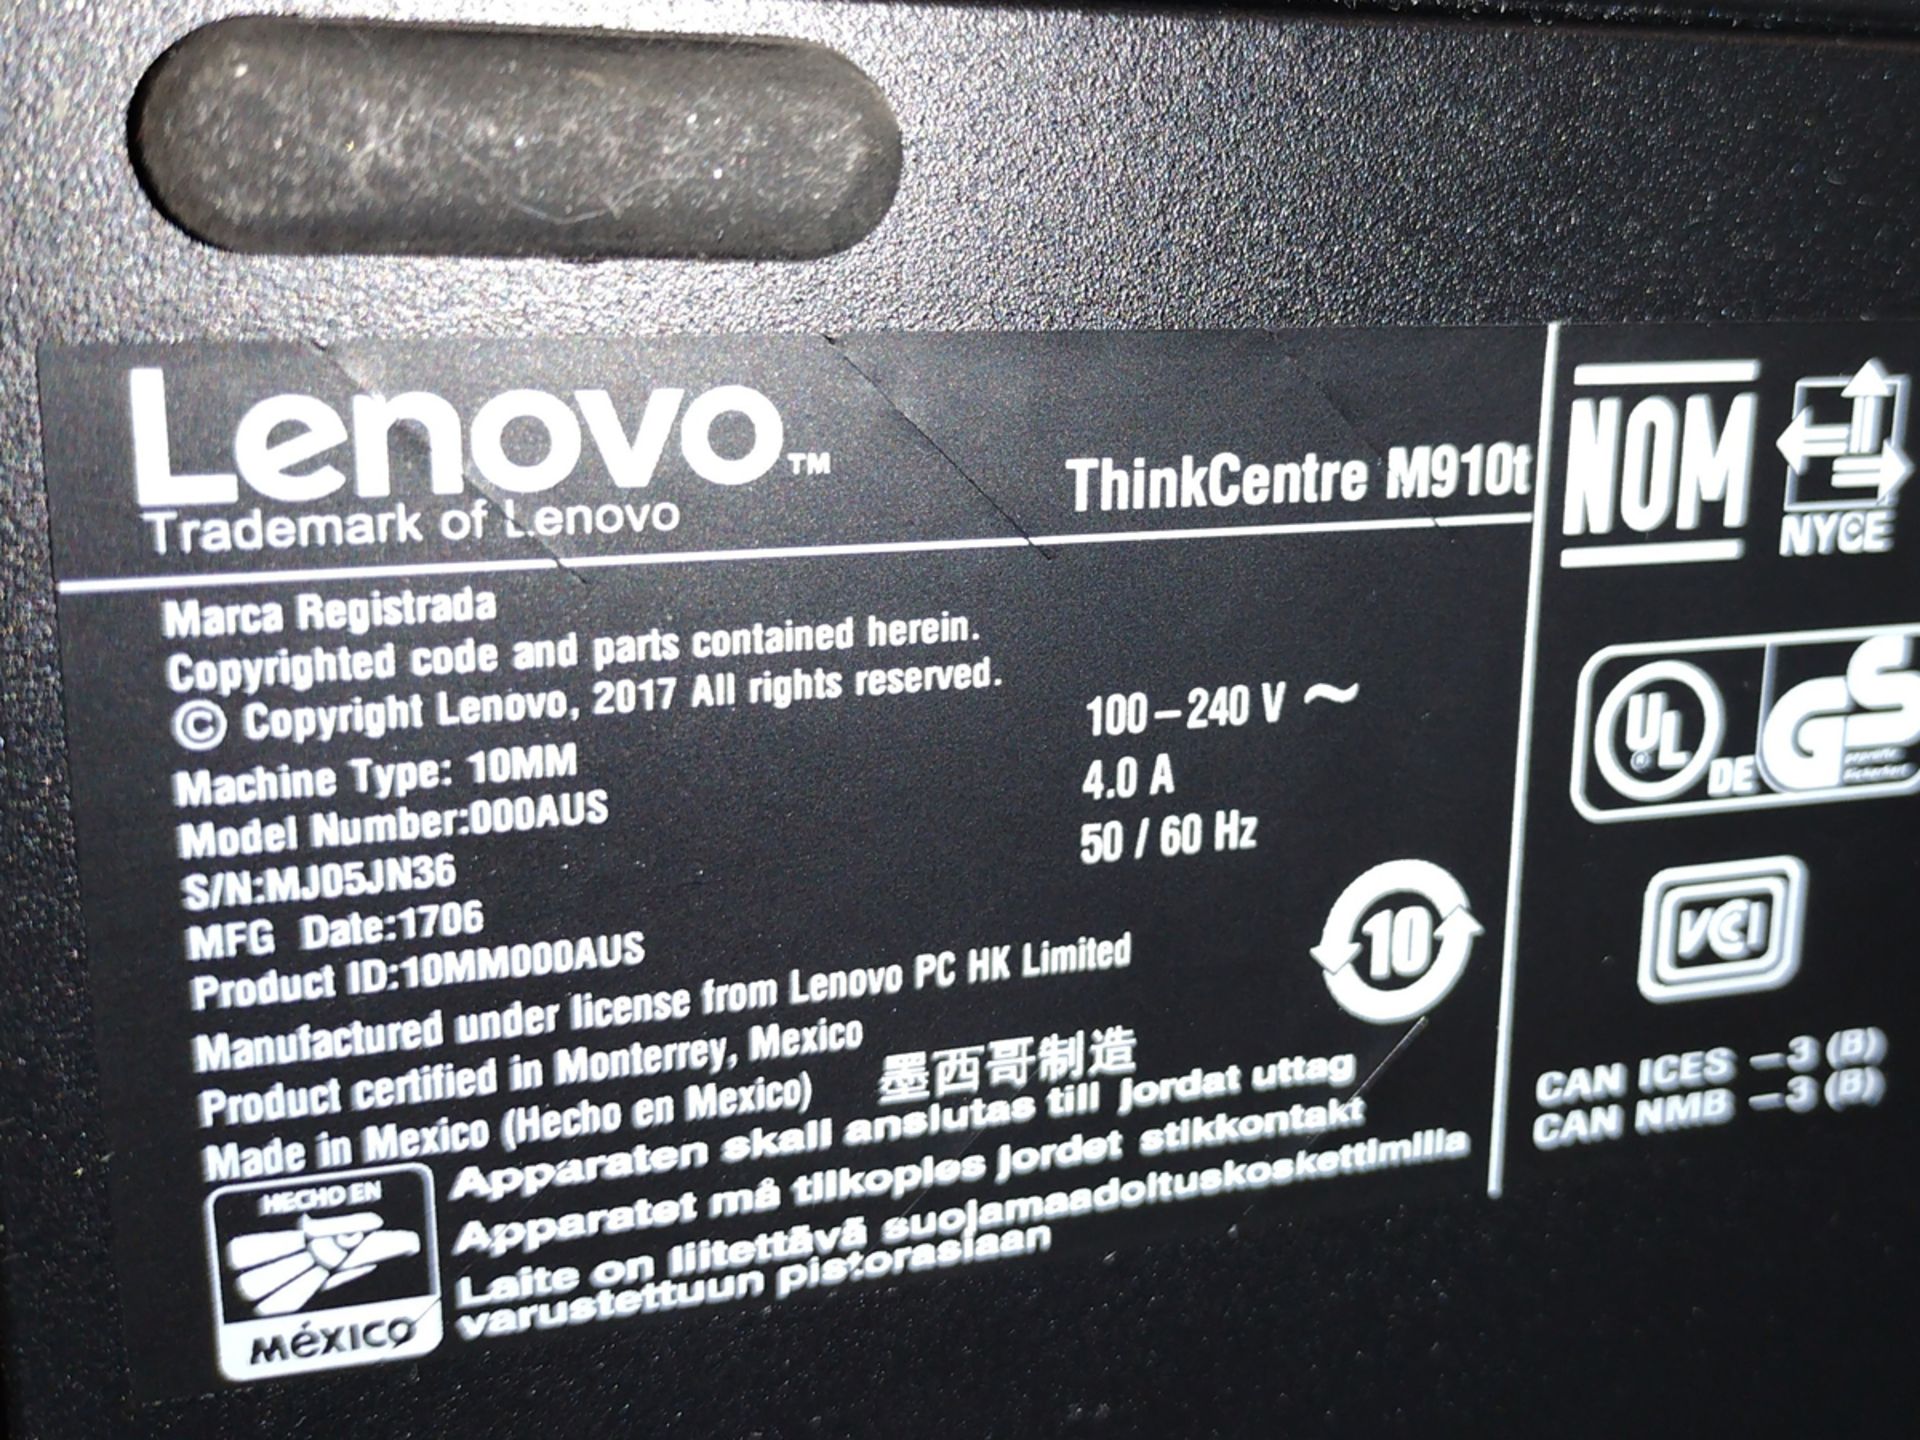 Lenovo M910t ThinkCentre i5 PC w/ Monitor and Keyboard - Image 2 of 2